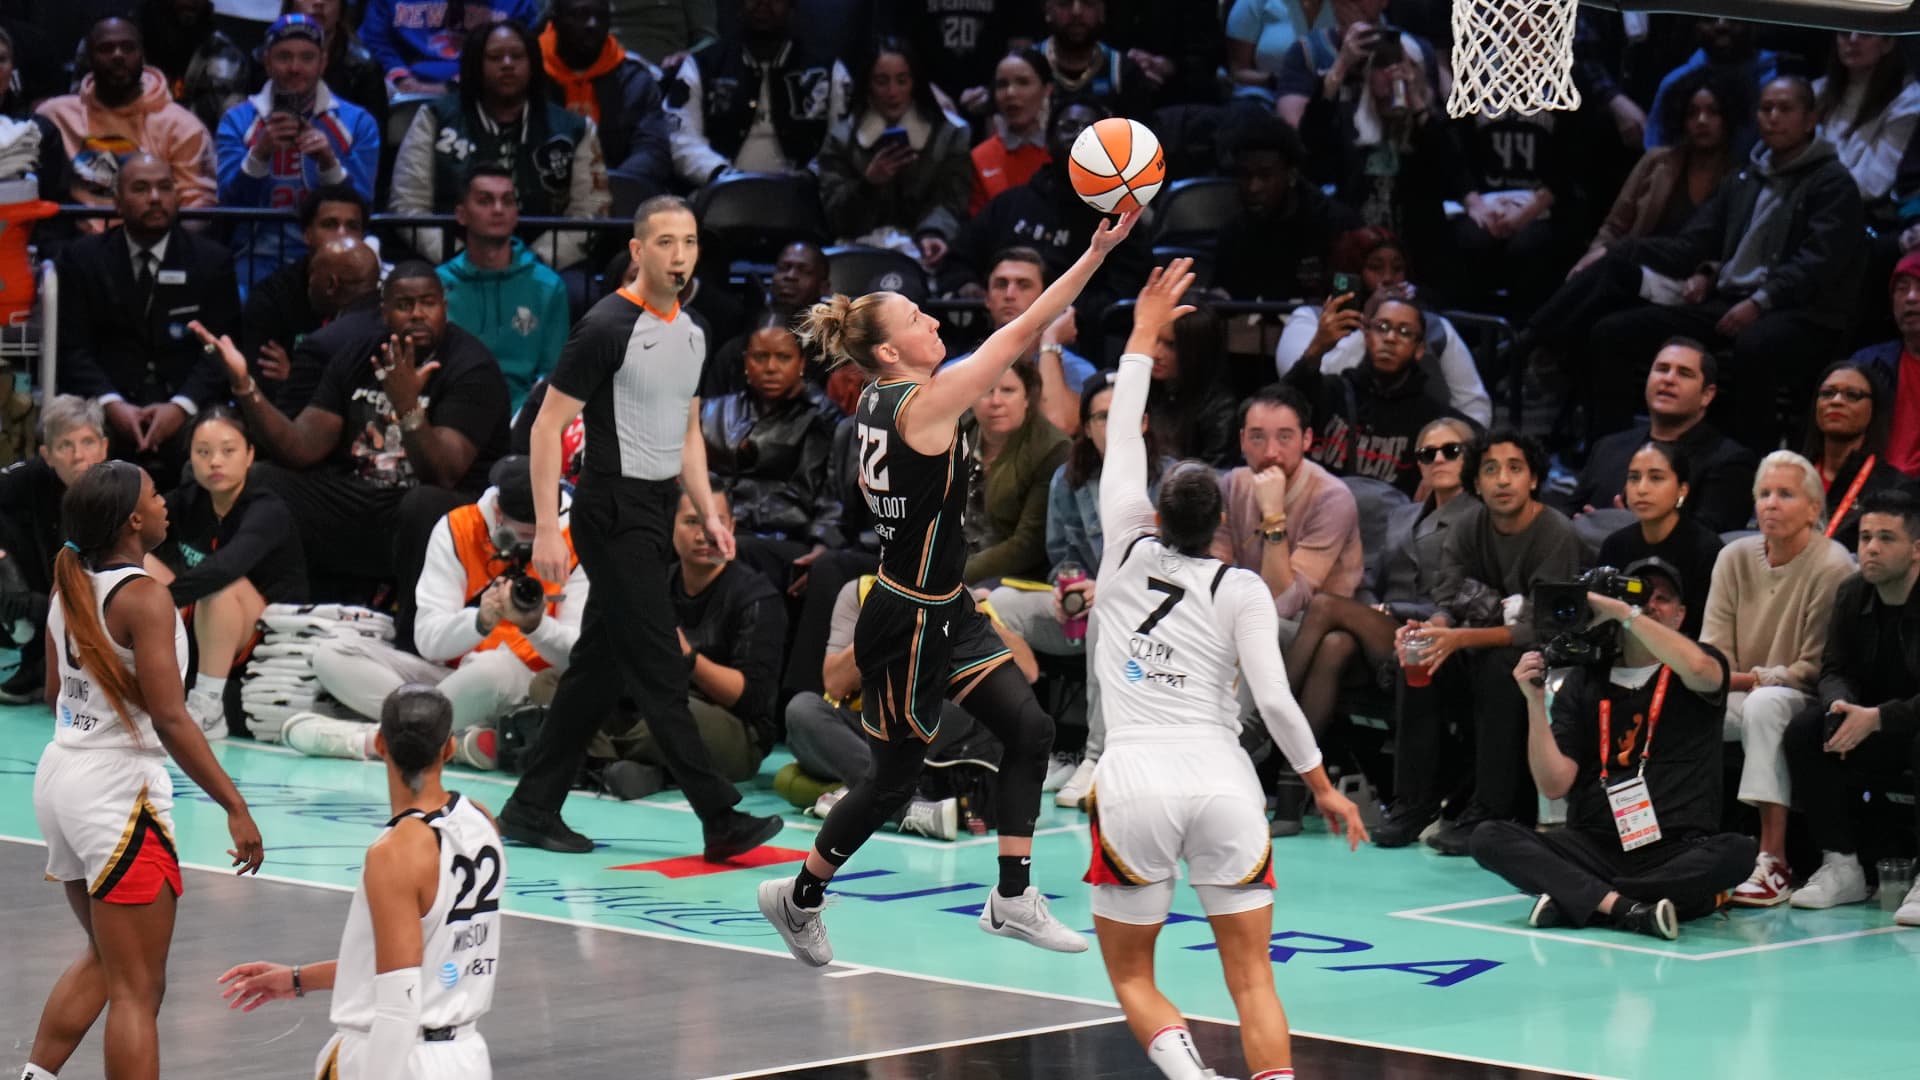 Courtney Vandersloot  of the New York Liberty drives to the basket during the game against the Las Vegas Aces during game 3 of the 2023 WNBA Finals on October 15, 2023 at the Barclays Center in Brooklyn, New York.